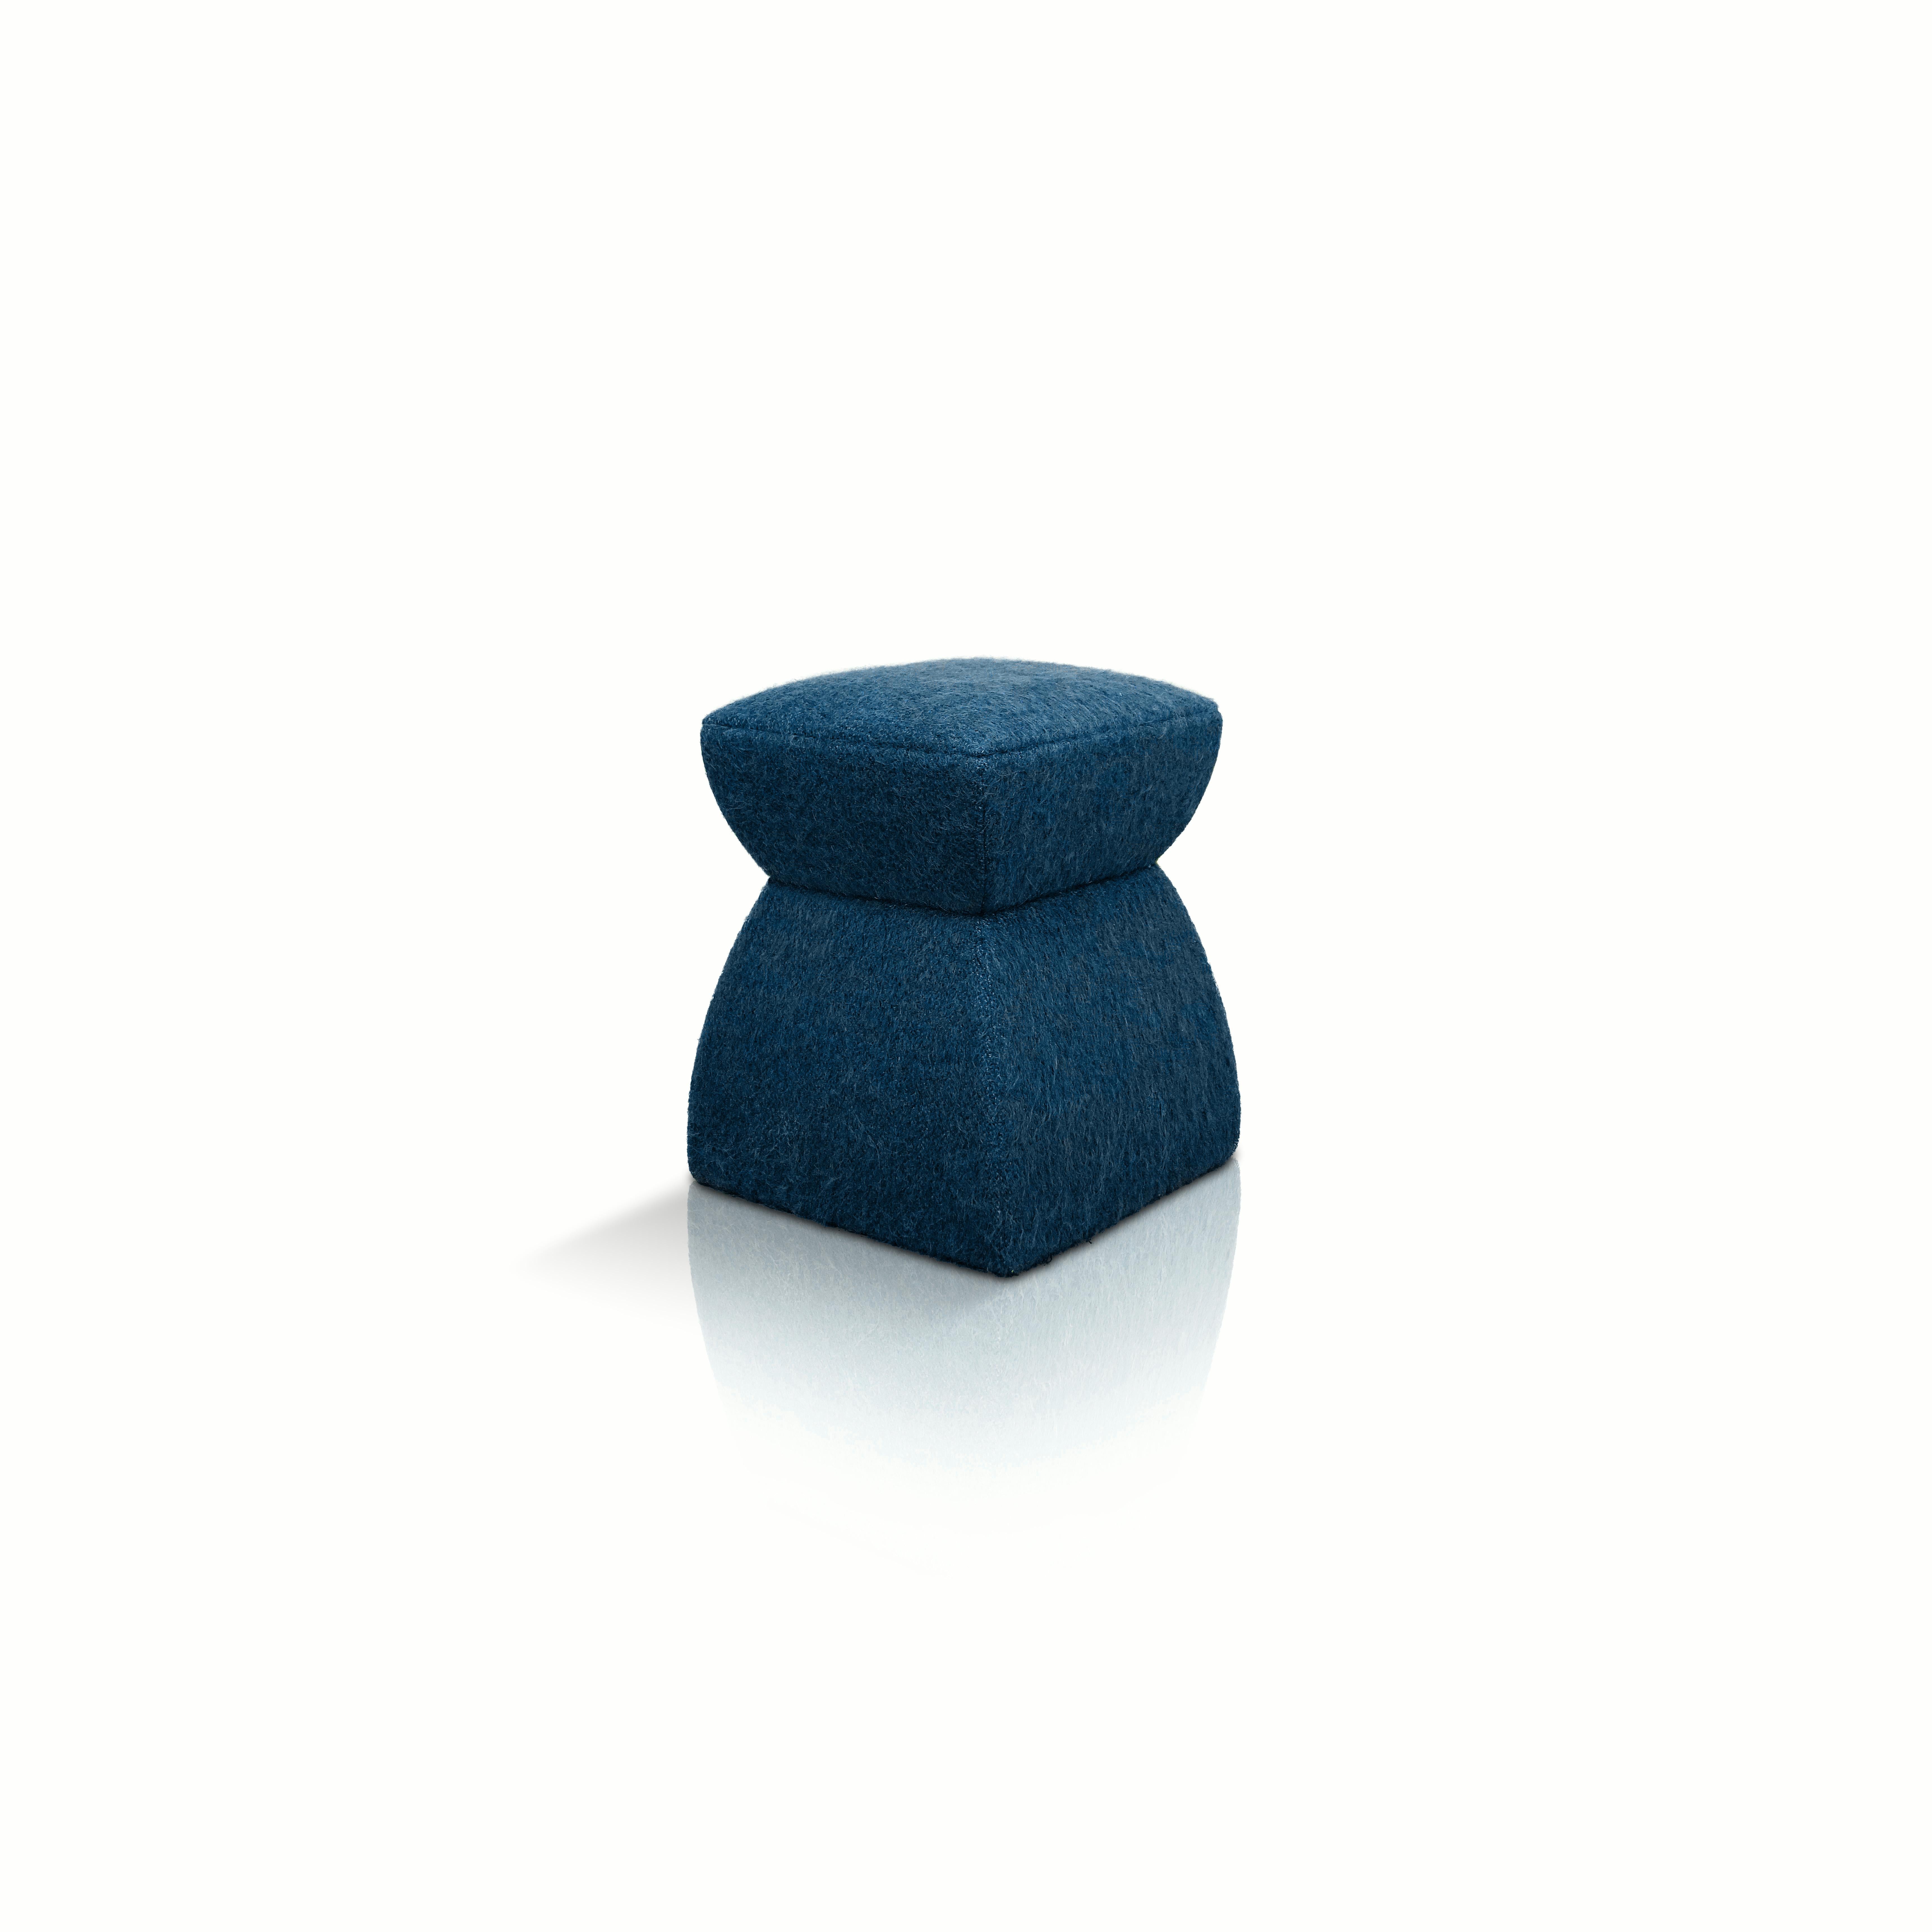 This fun yet Classic pouf is indeed a celebration of the Romanian sculptor Constantin Brâncusi’s contribution to modernism, referencing one of his most celebrated work, infinite column. High-grade plain weaves of wool, mohair and long-haired alpaca